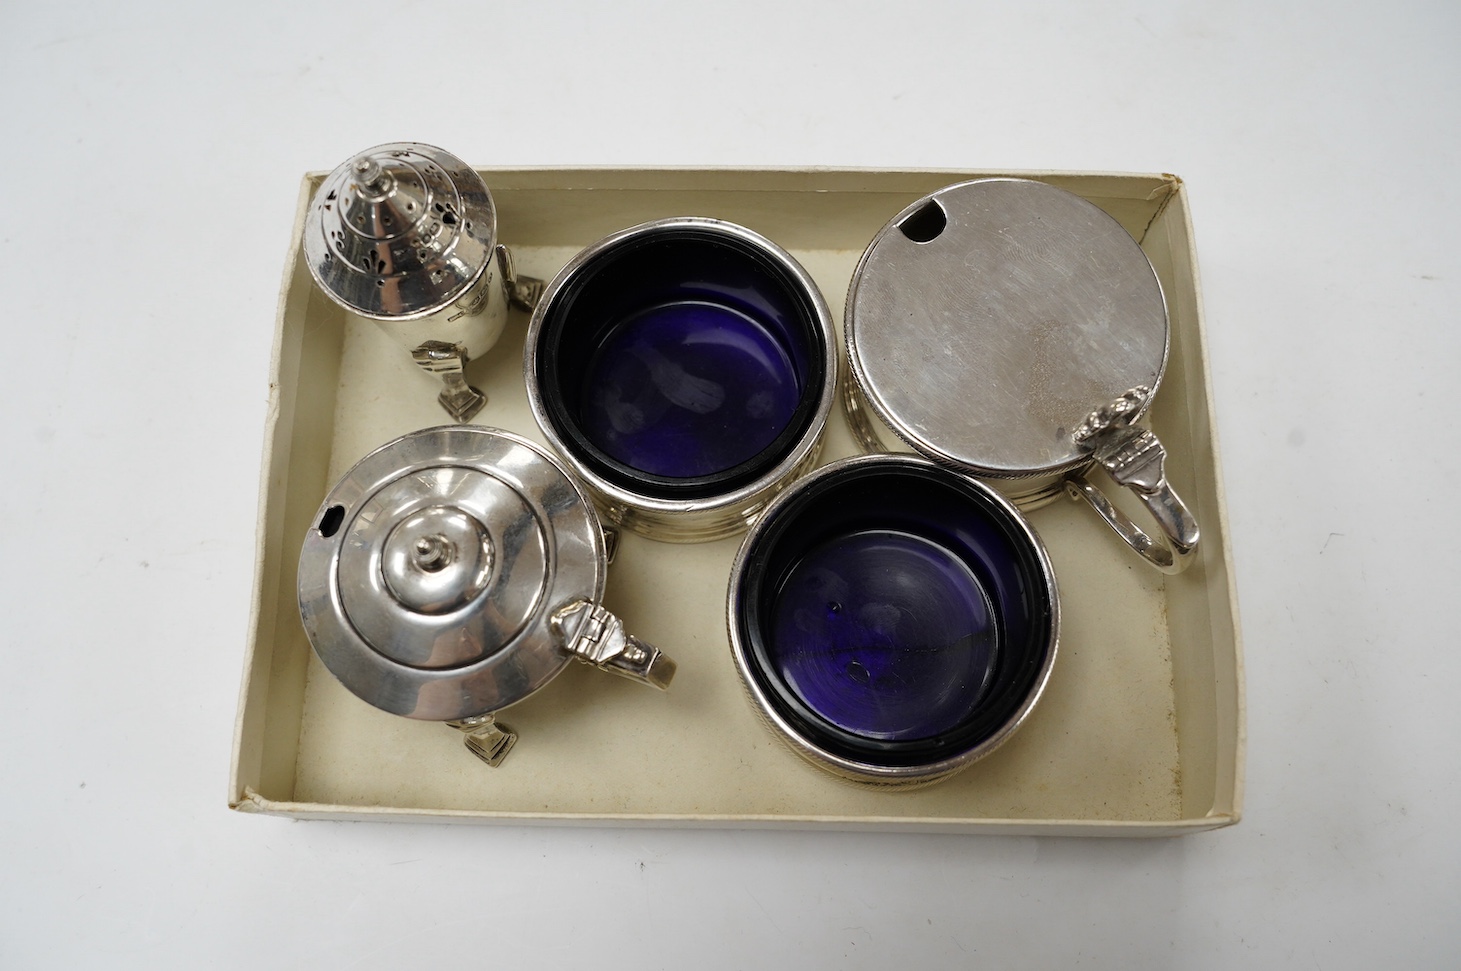 A George V matched silver three piece condiment set, London, 1931(2) and 1933, together with two other silver condiments. Condition - poor to fair